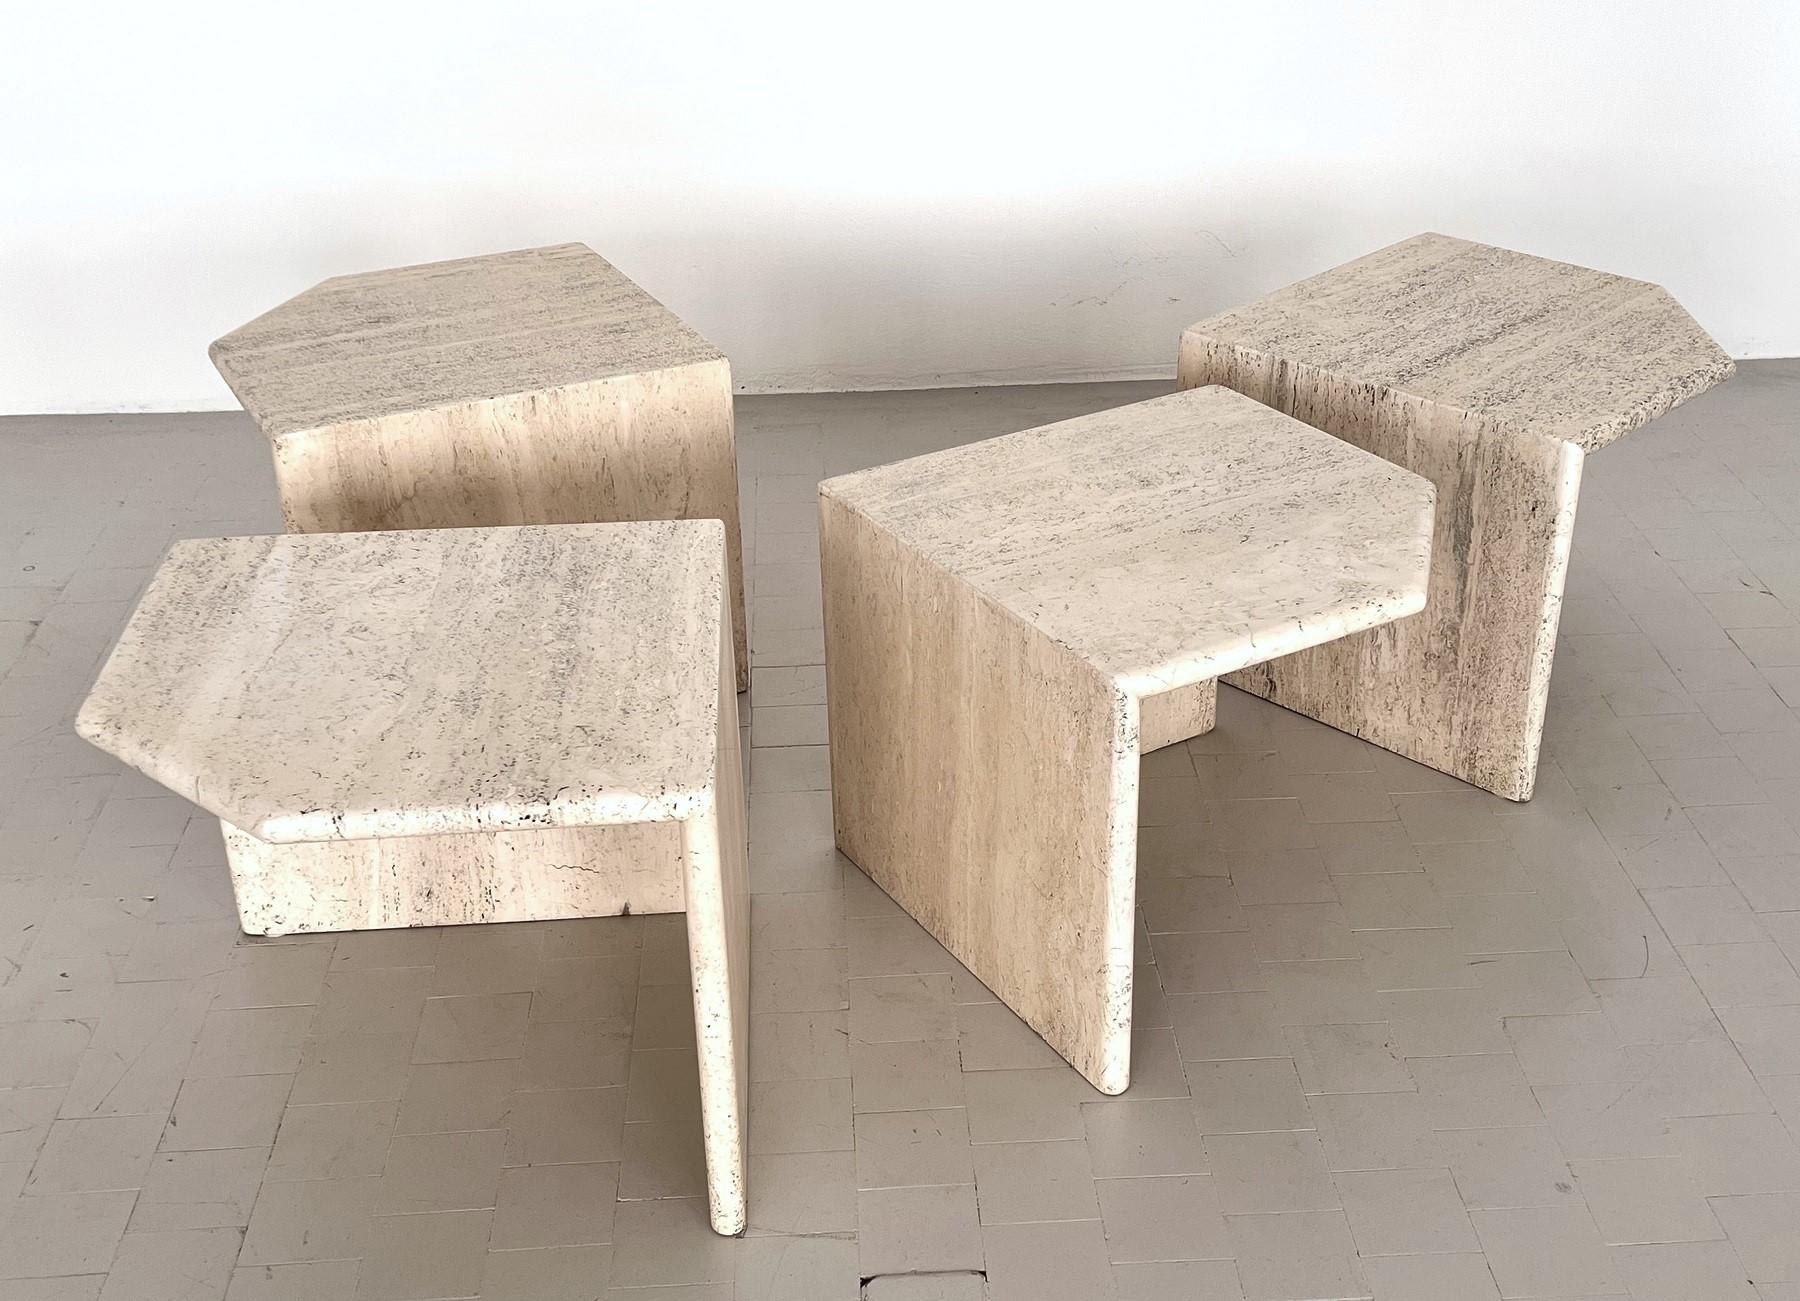 Late 20th Century Italian Midcentury Sectional Travertine Marble Coffee Table of Four Pieces, 1970 For Sale